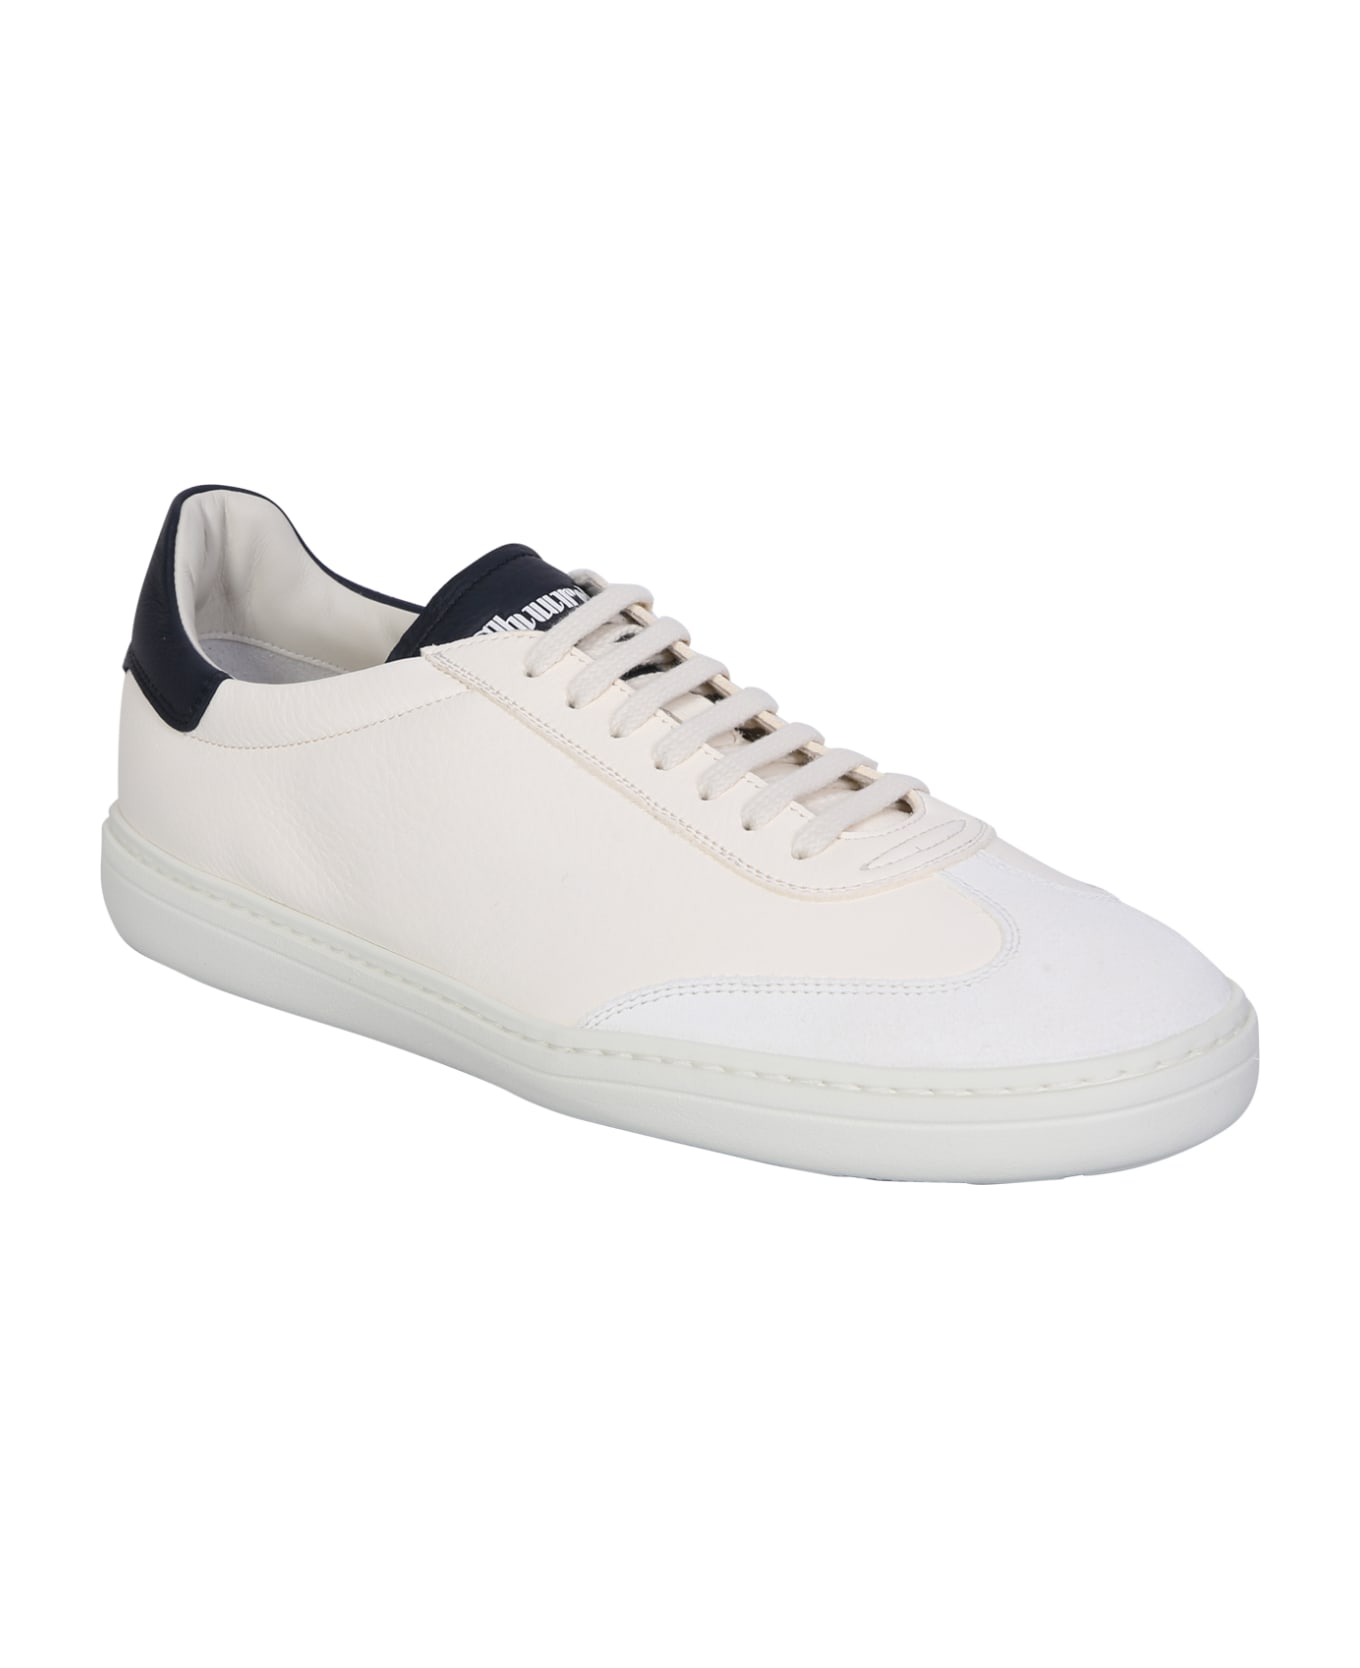 Church's Ivory Boland 2 Sneakers - Ivory